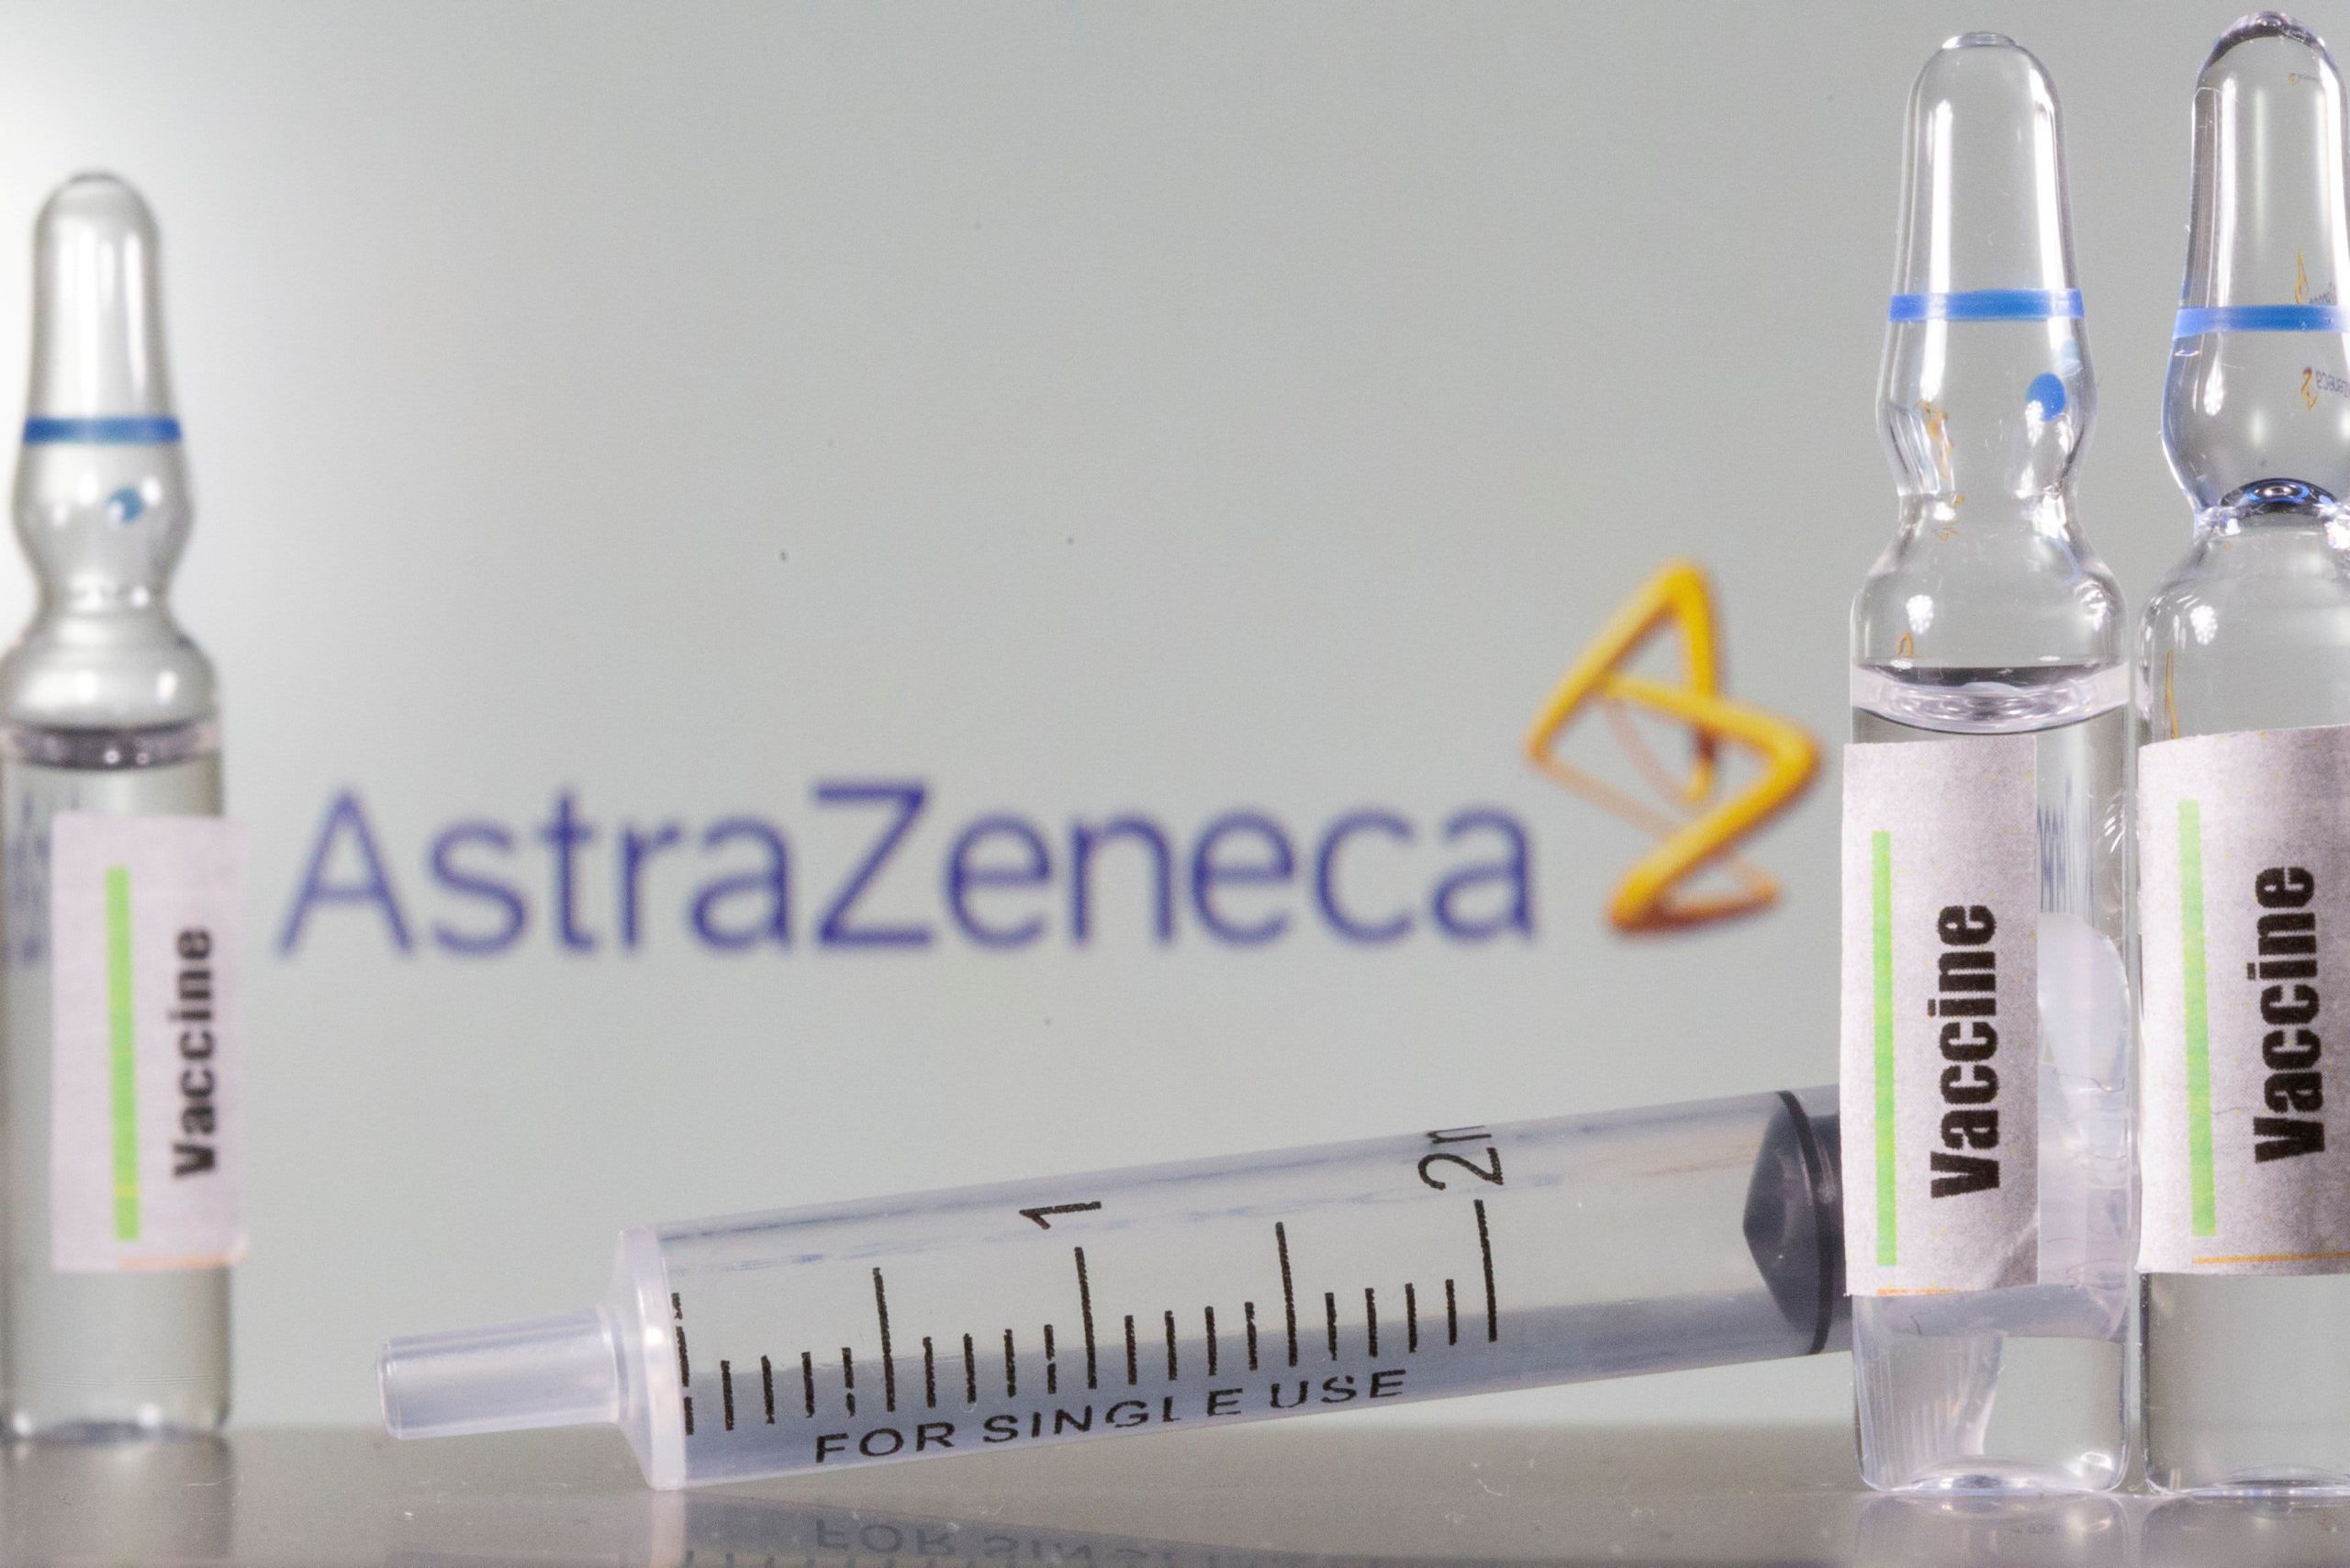 Oxford-AstraZeneca Covid vaccine is protected and efficient: Researchers